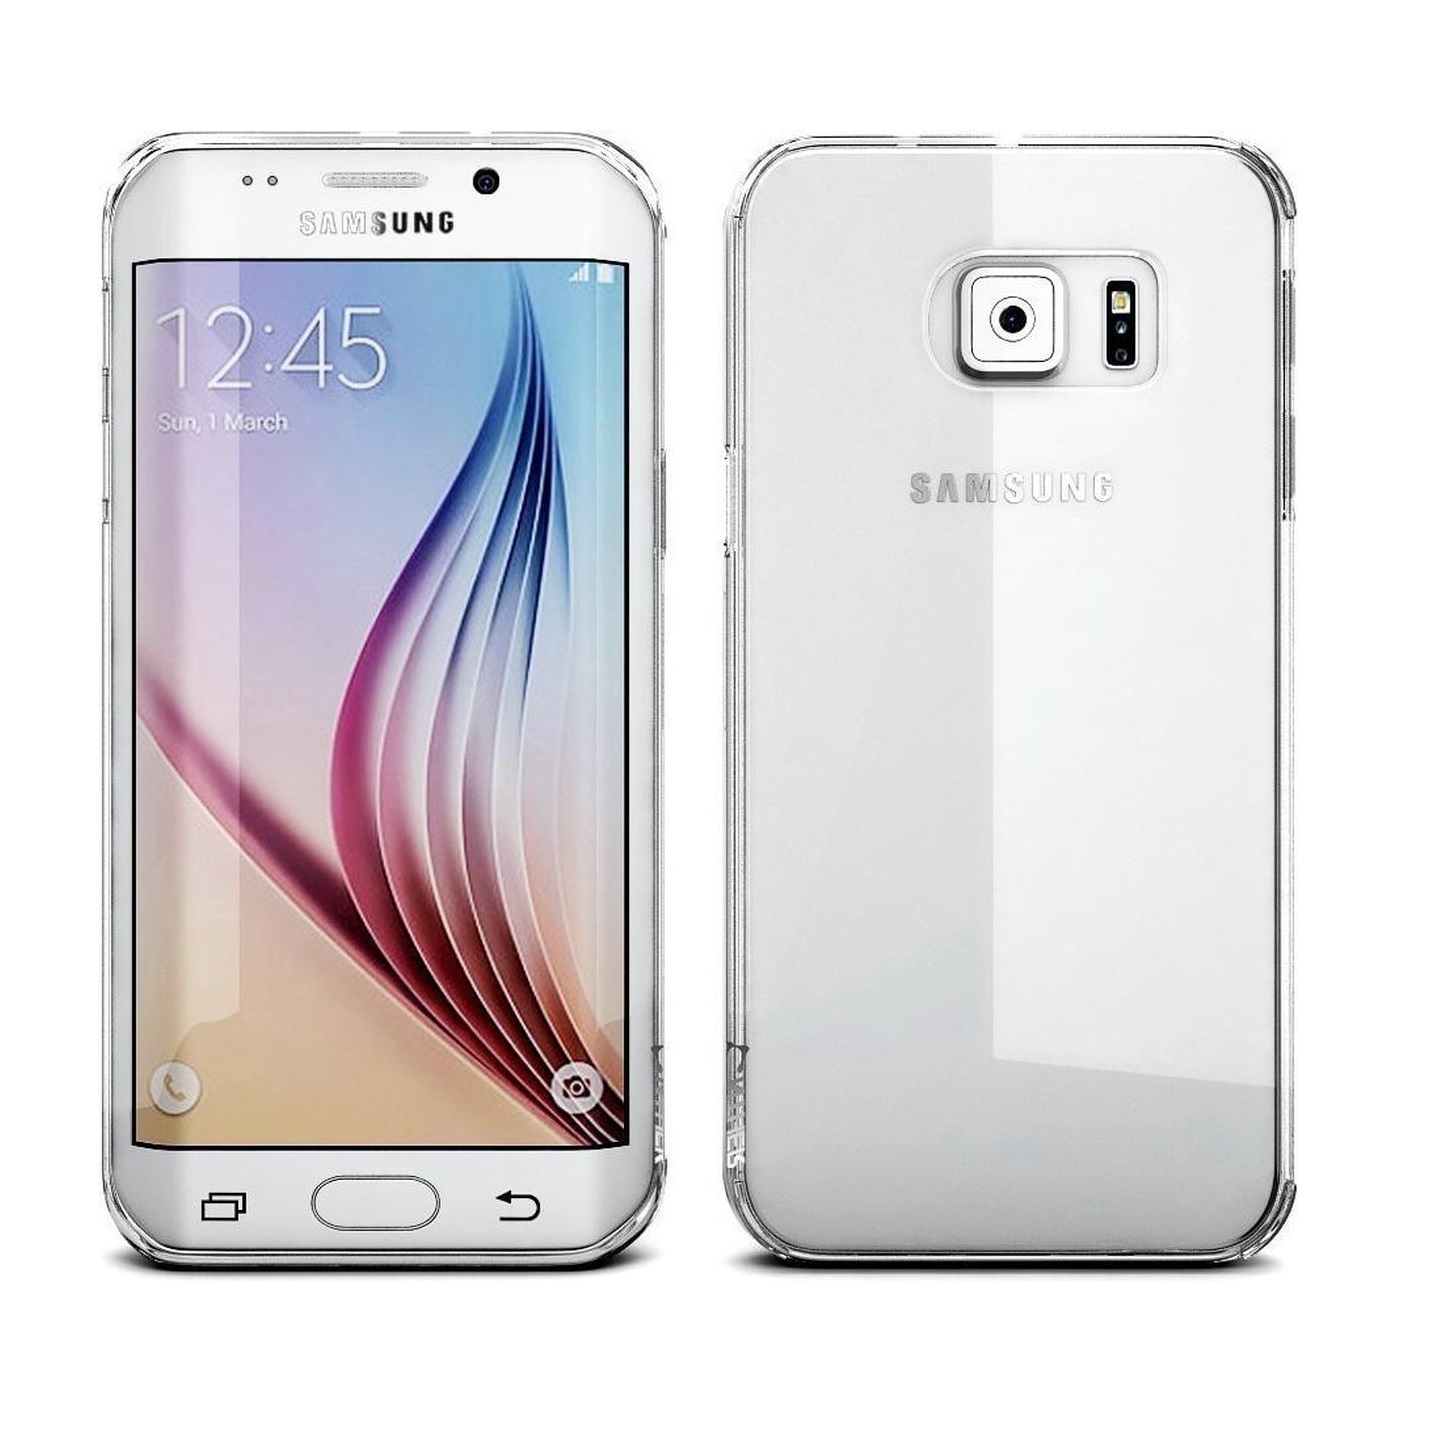 Hoesje geschikt voor Samsung Galaxy S6 Edge Plus - Silicone case -  Kunststof - Soft cover - Transparant - All4Gadgets